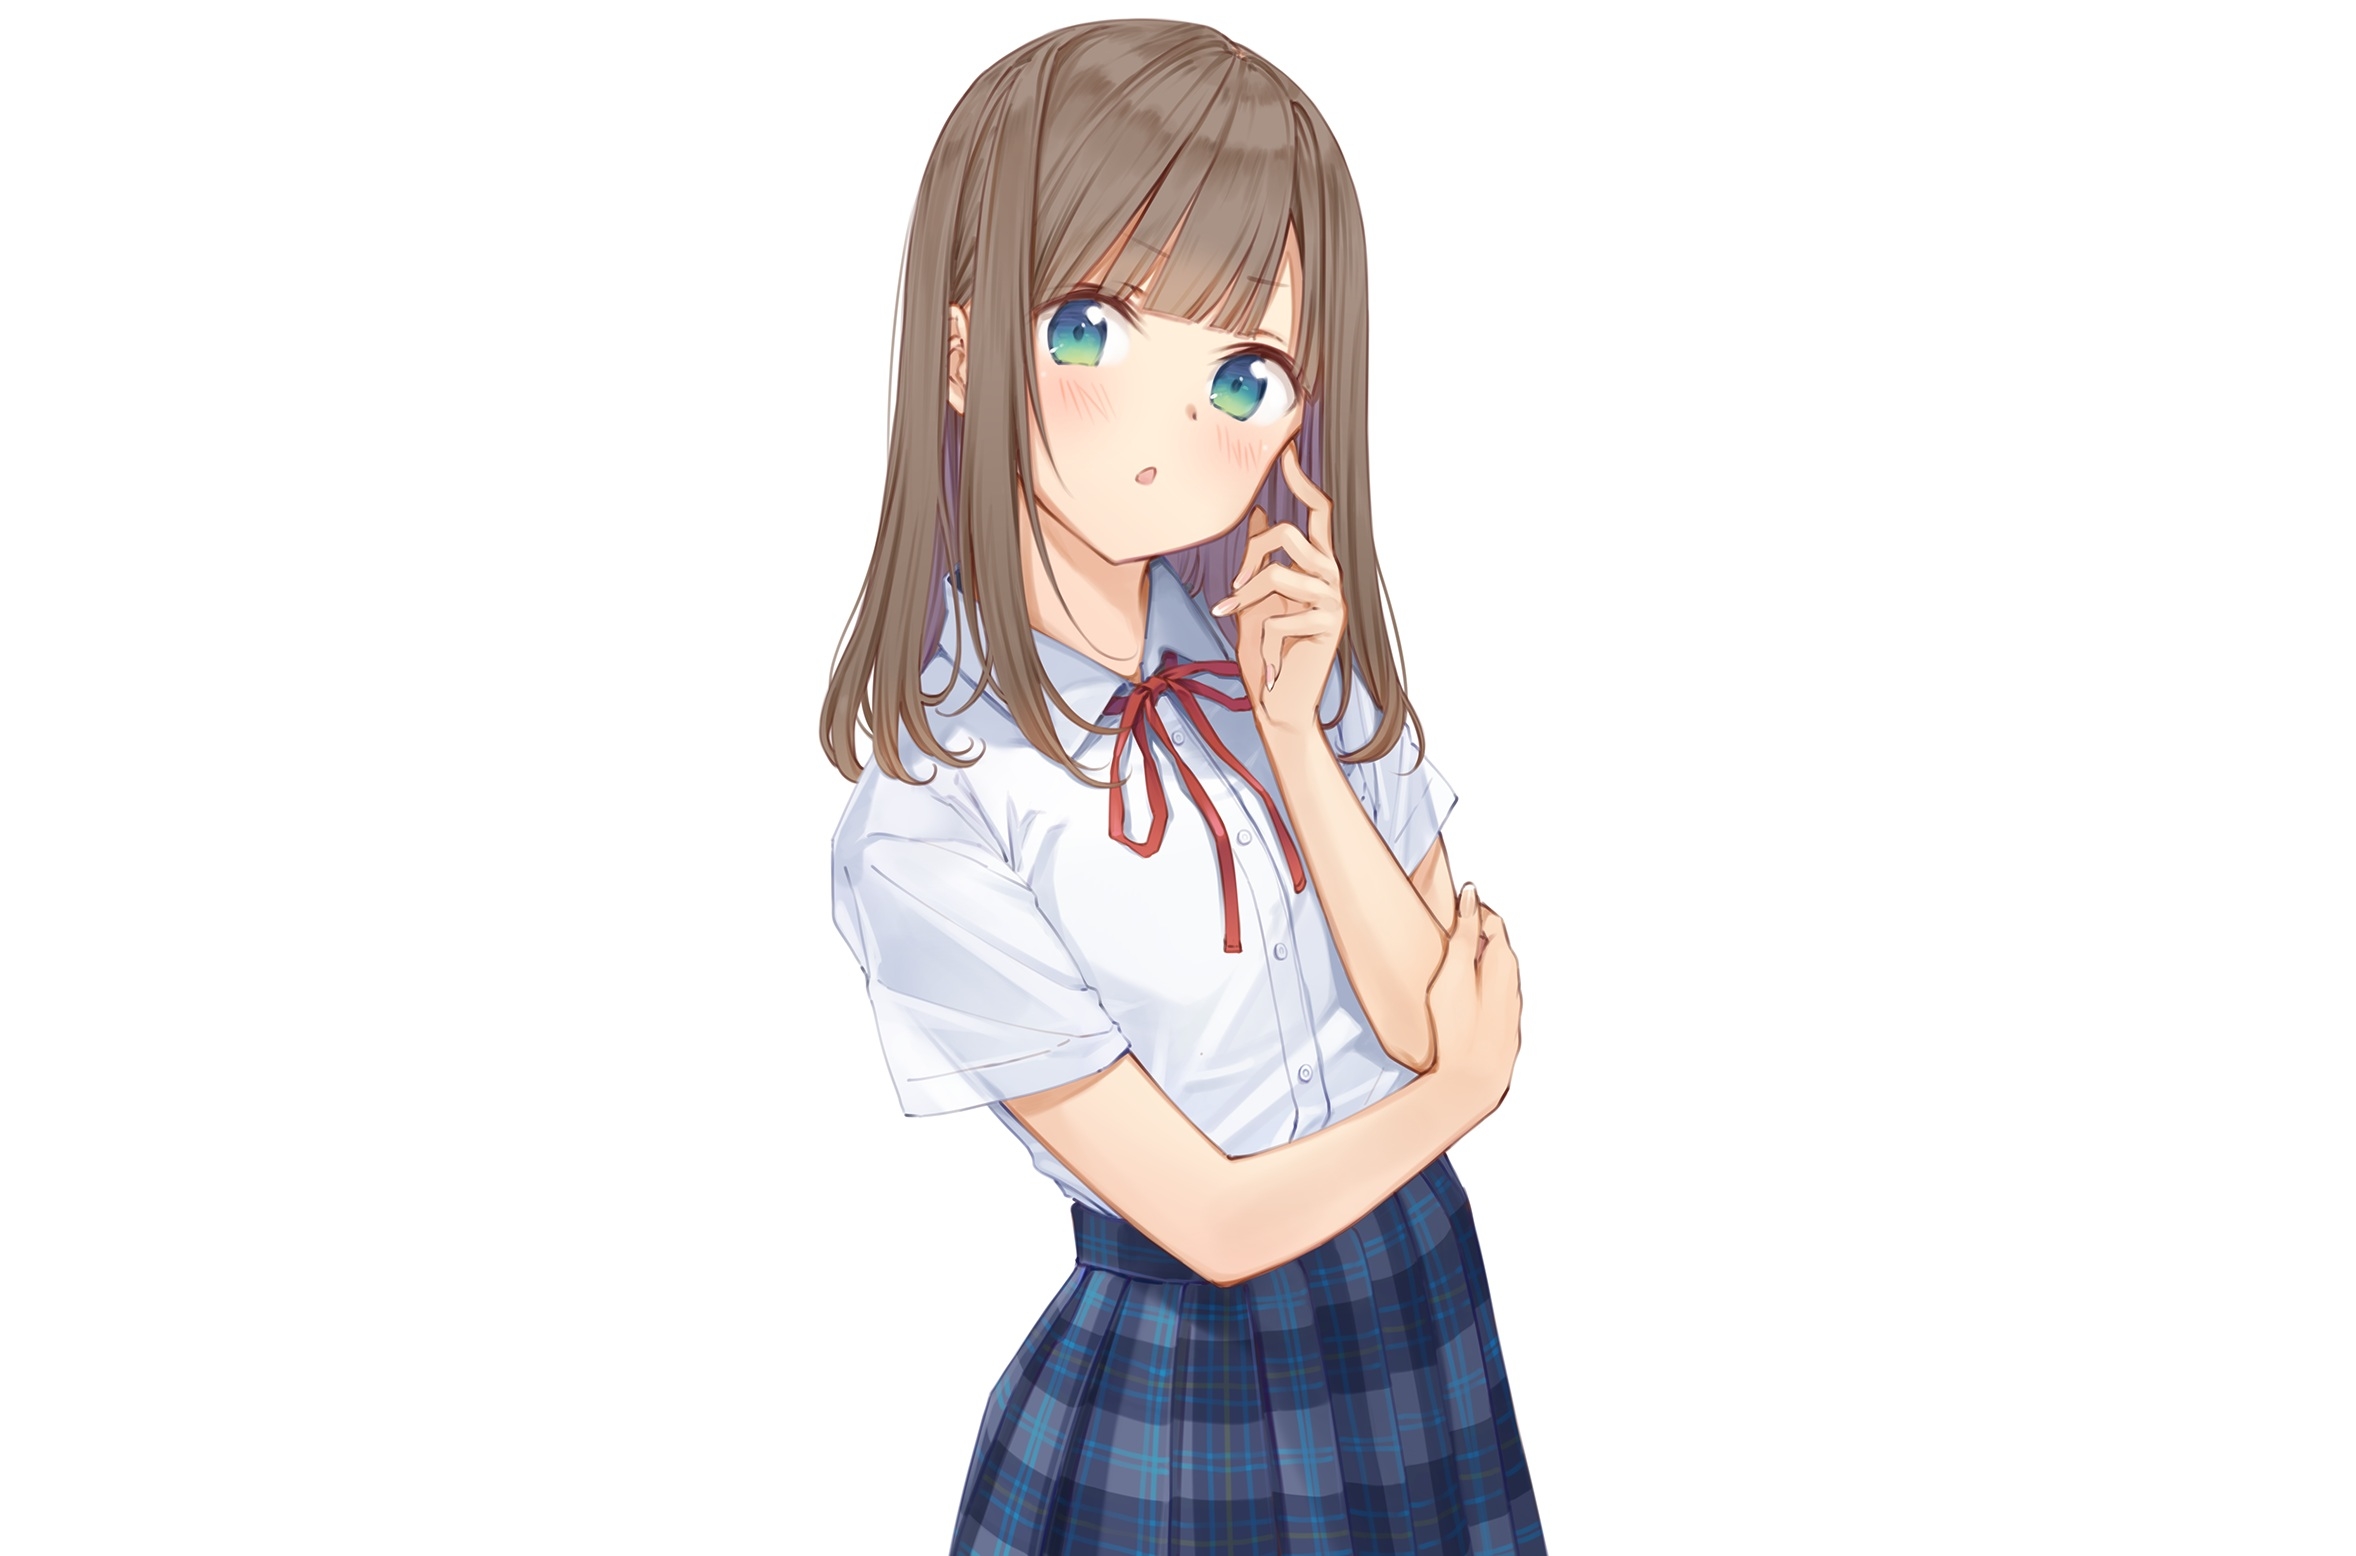 Anime Girl Render 1 By Niri14-dal55cg - Anime Girl With Brown Hair And  Hazel Eyes Transparent PNG - 610x959 - Free Download on NicePNG